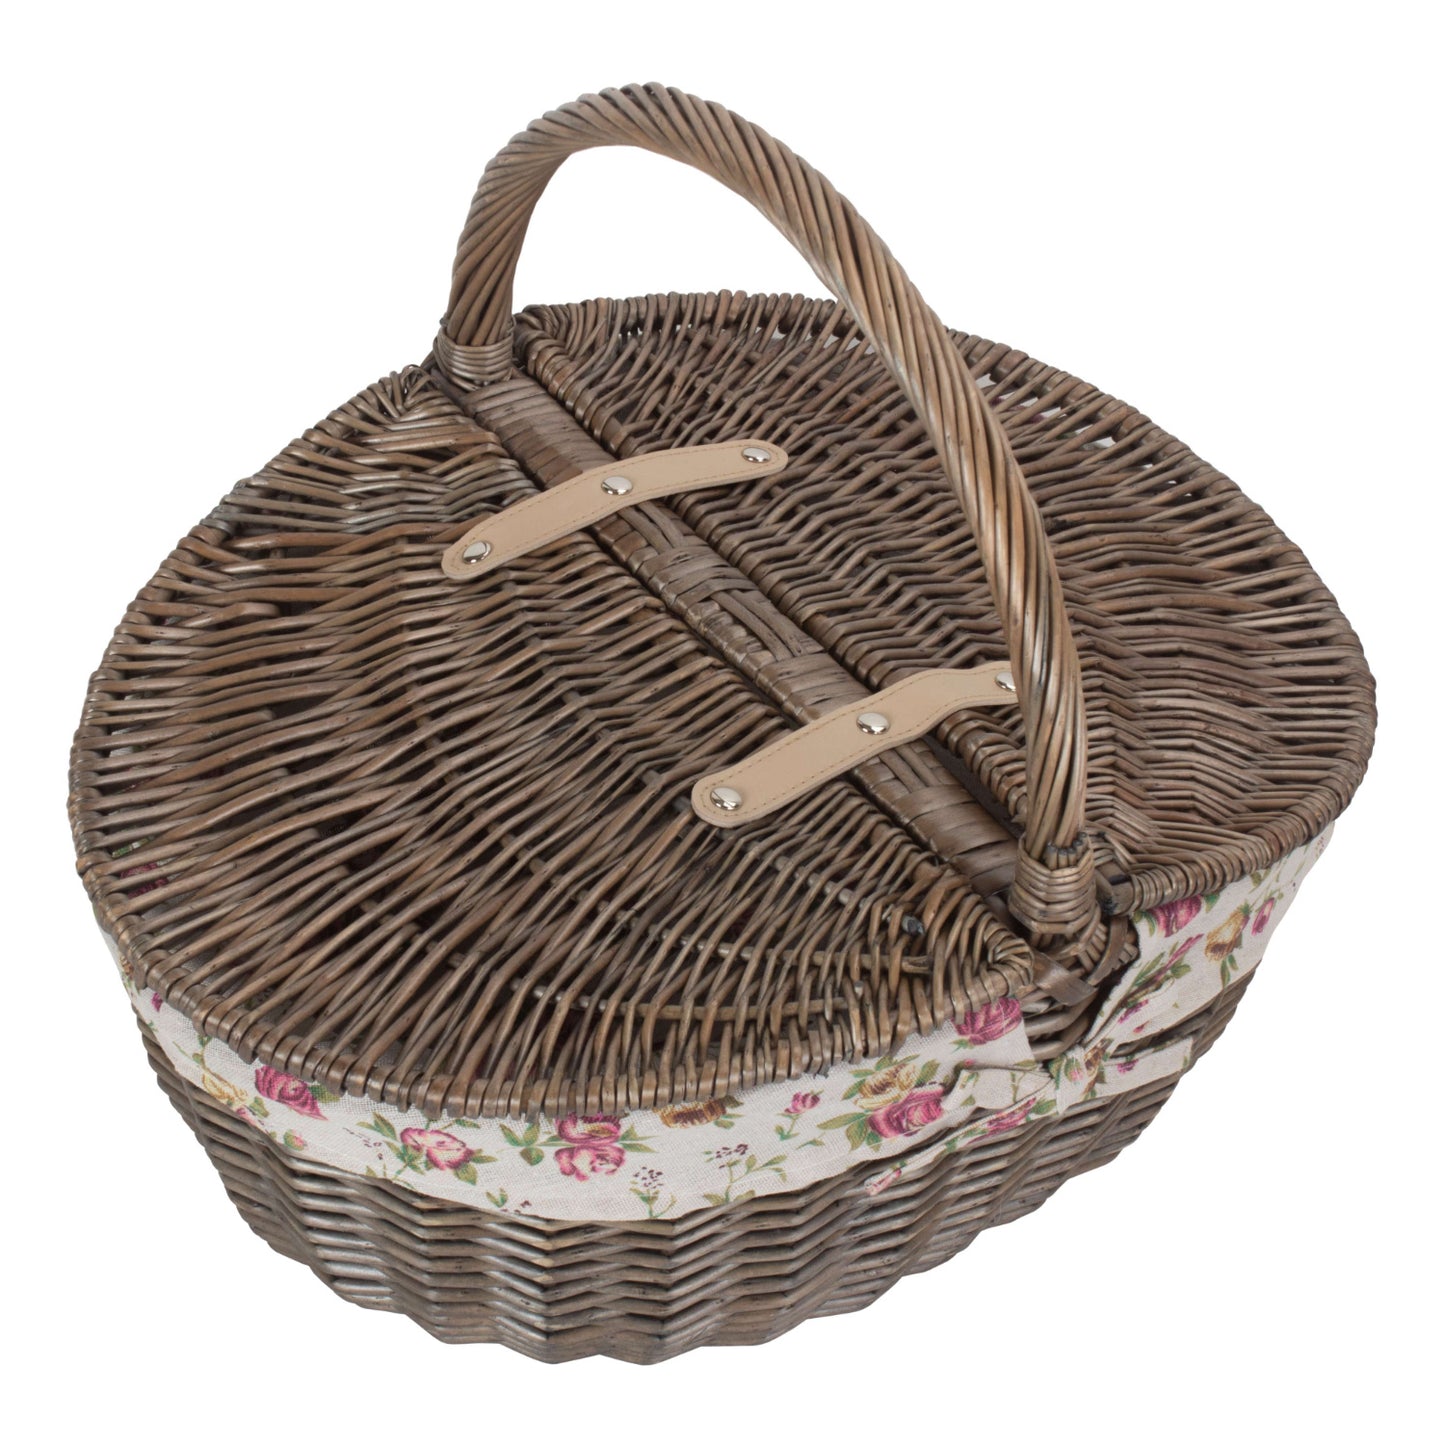 Antique Wash Finish Oval Picnic Basket With Garden Rose Lining